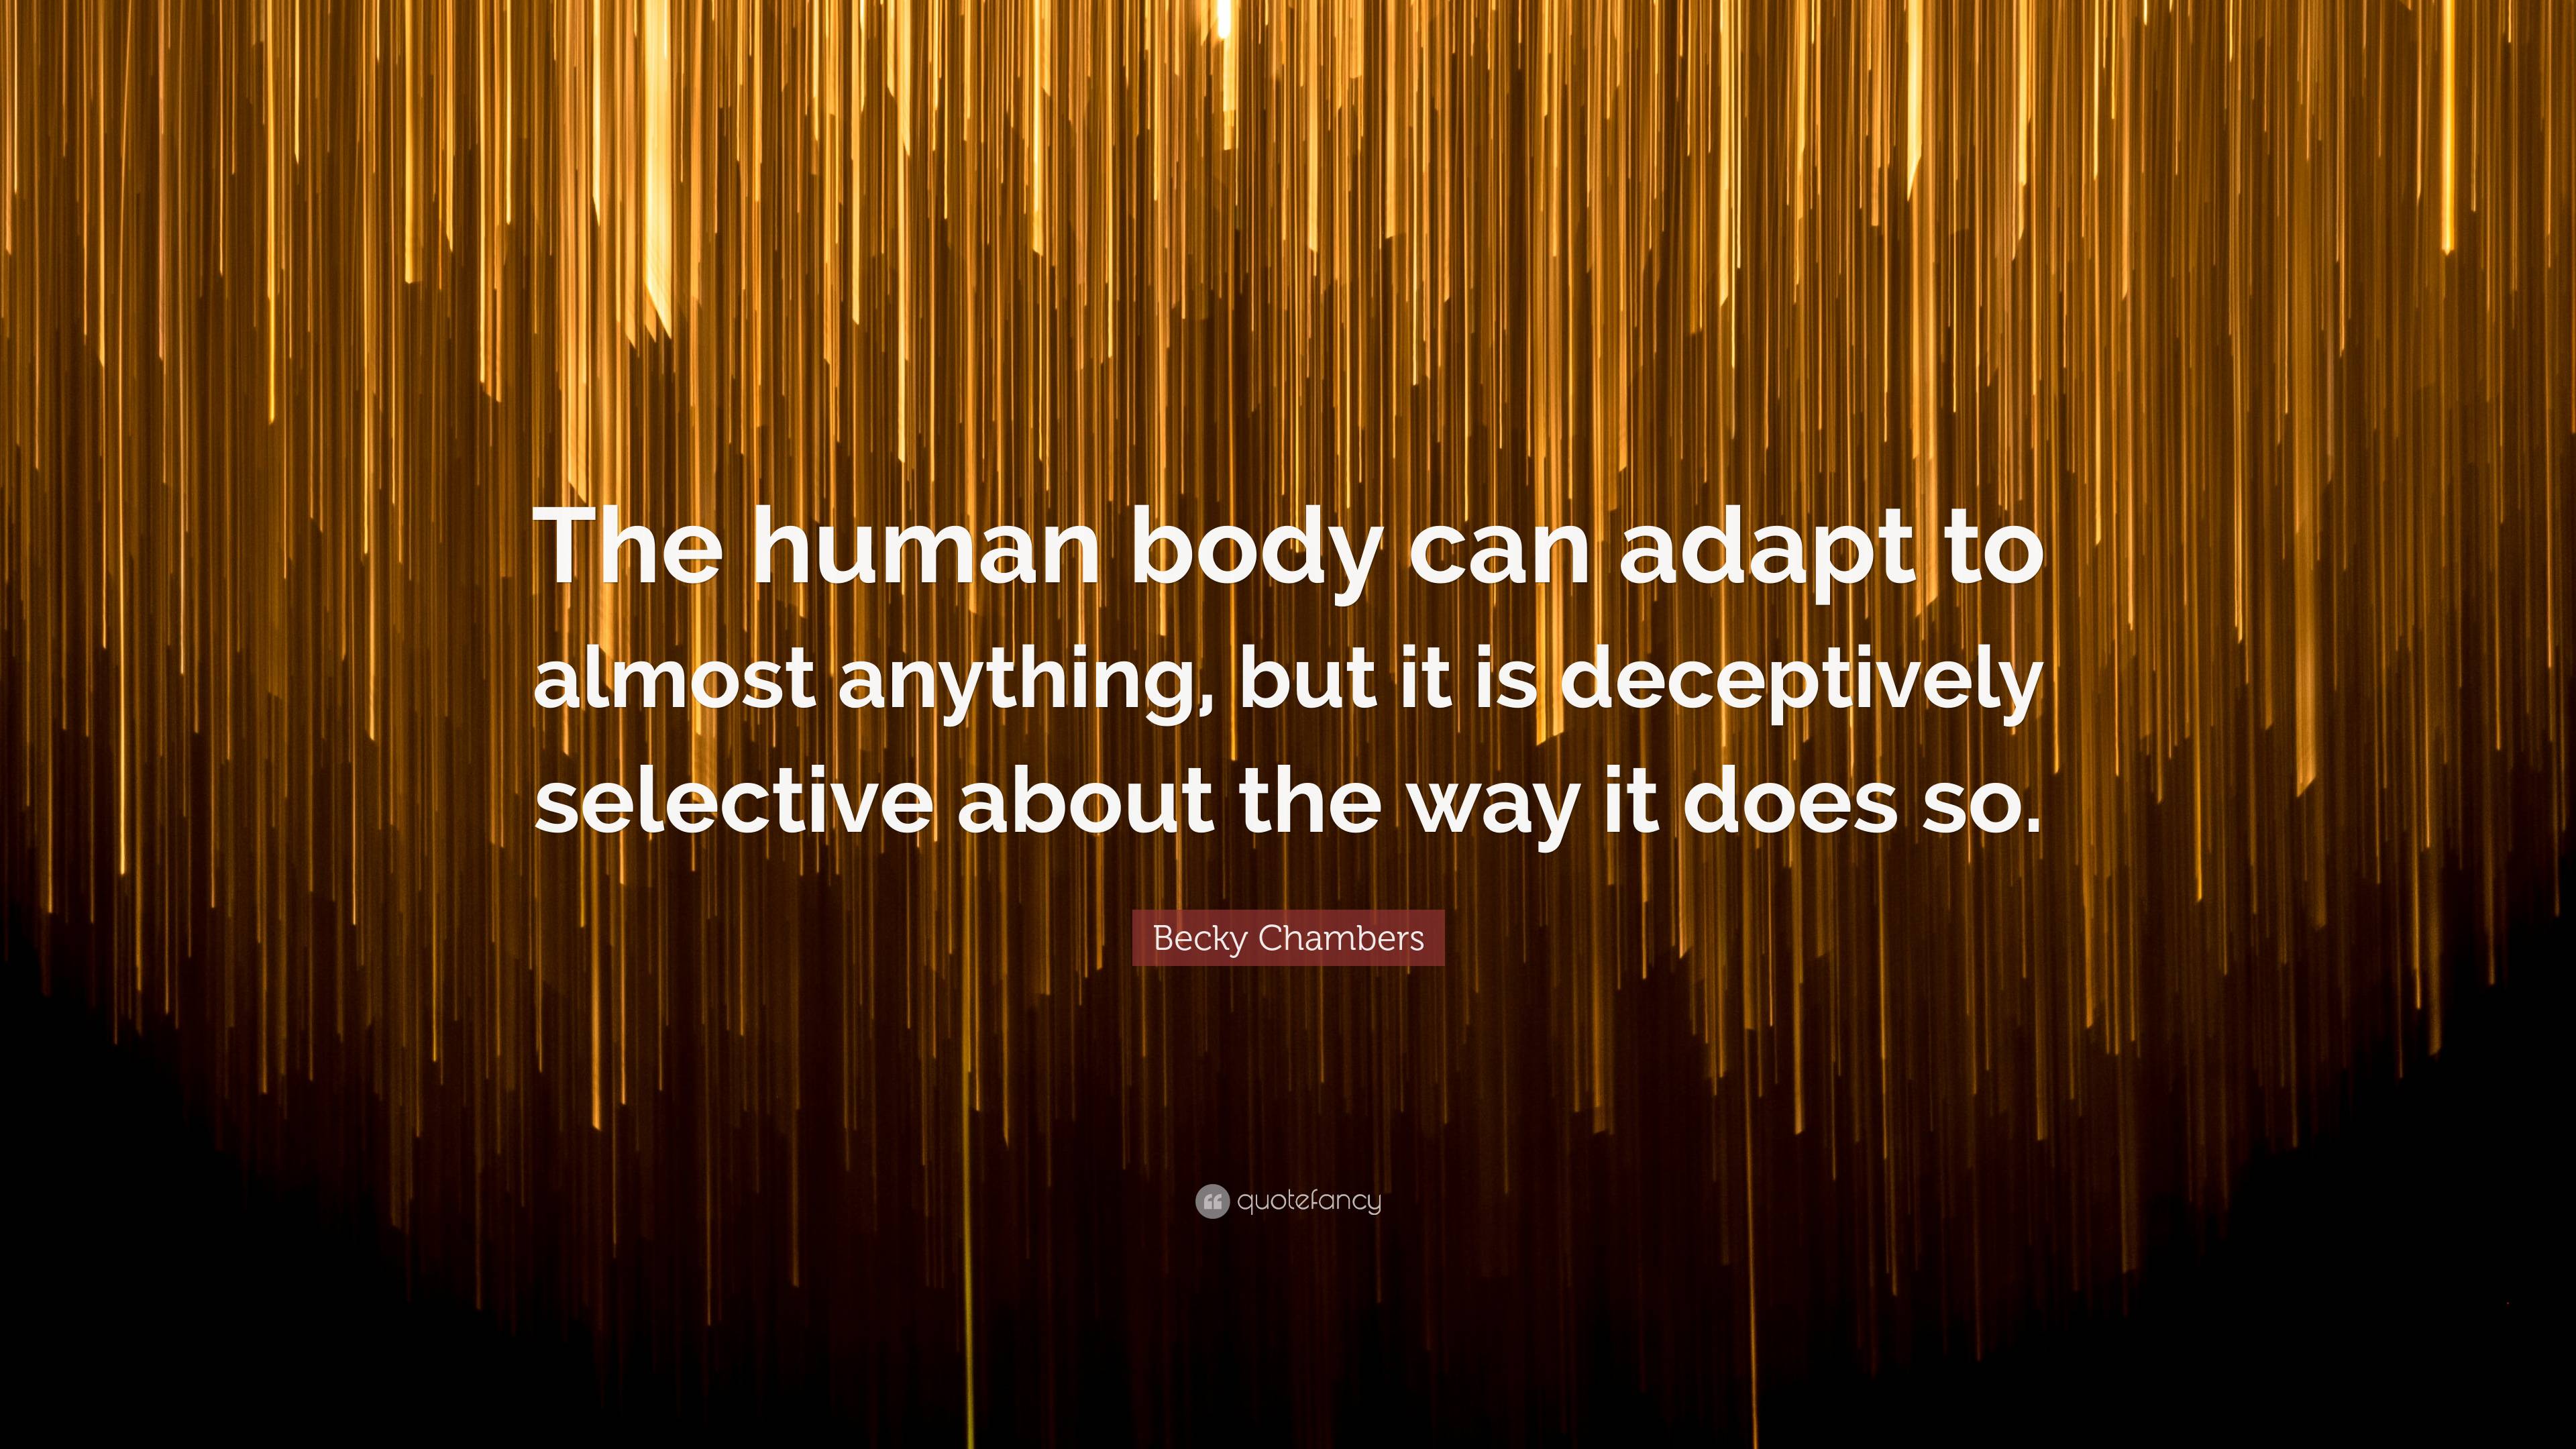 Becky Chambers Quote: “The human body can adapt to almost anything